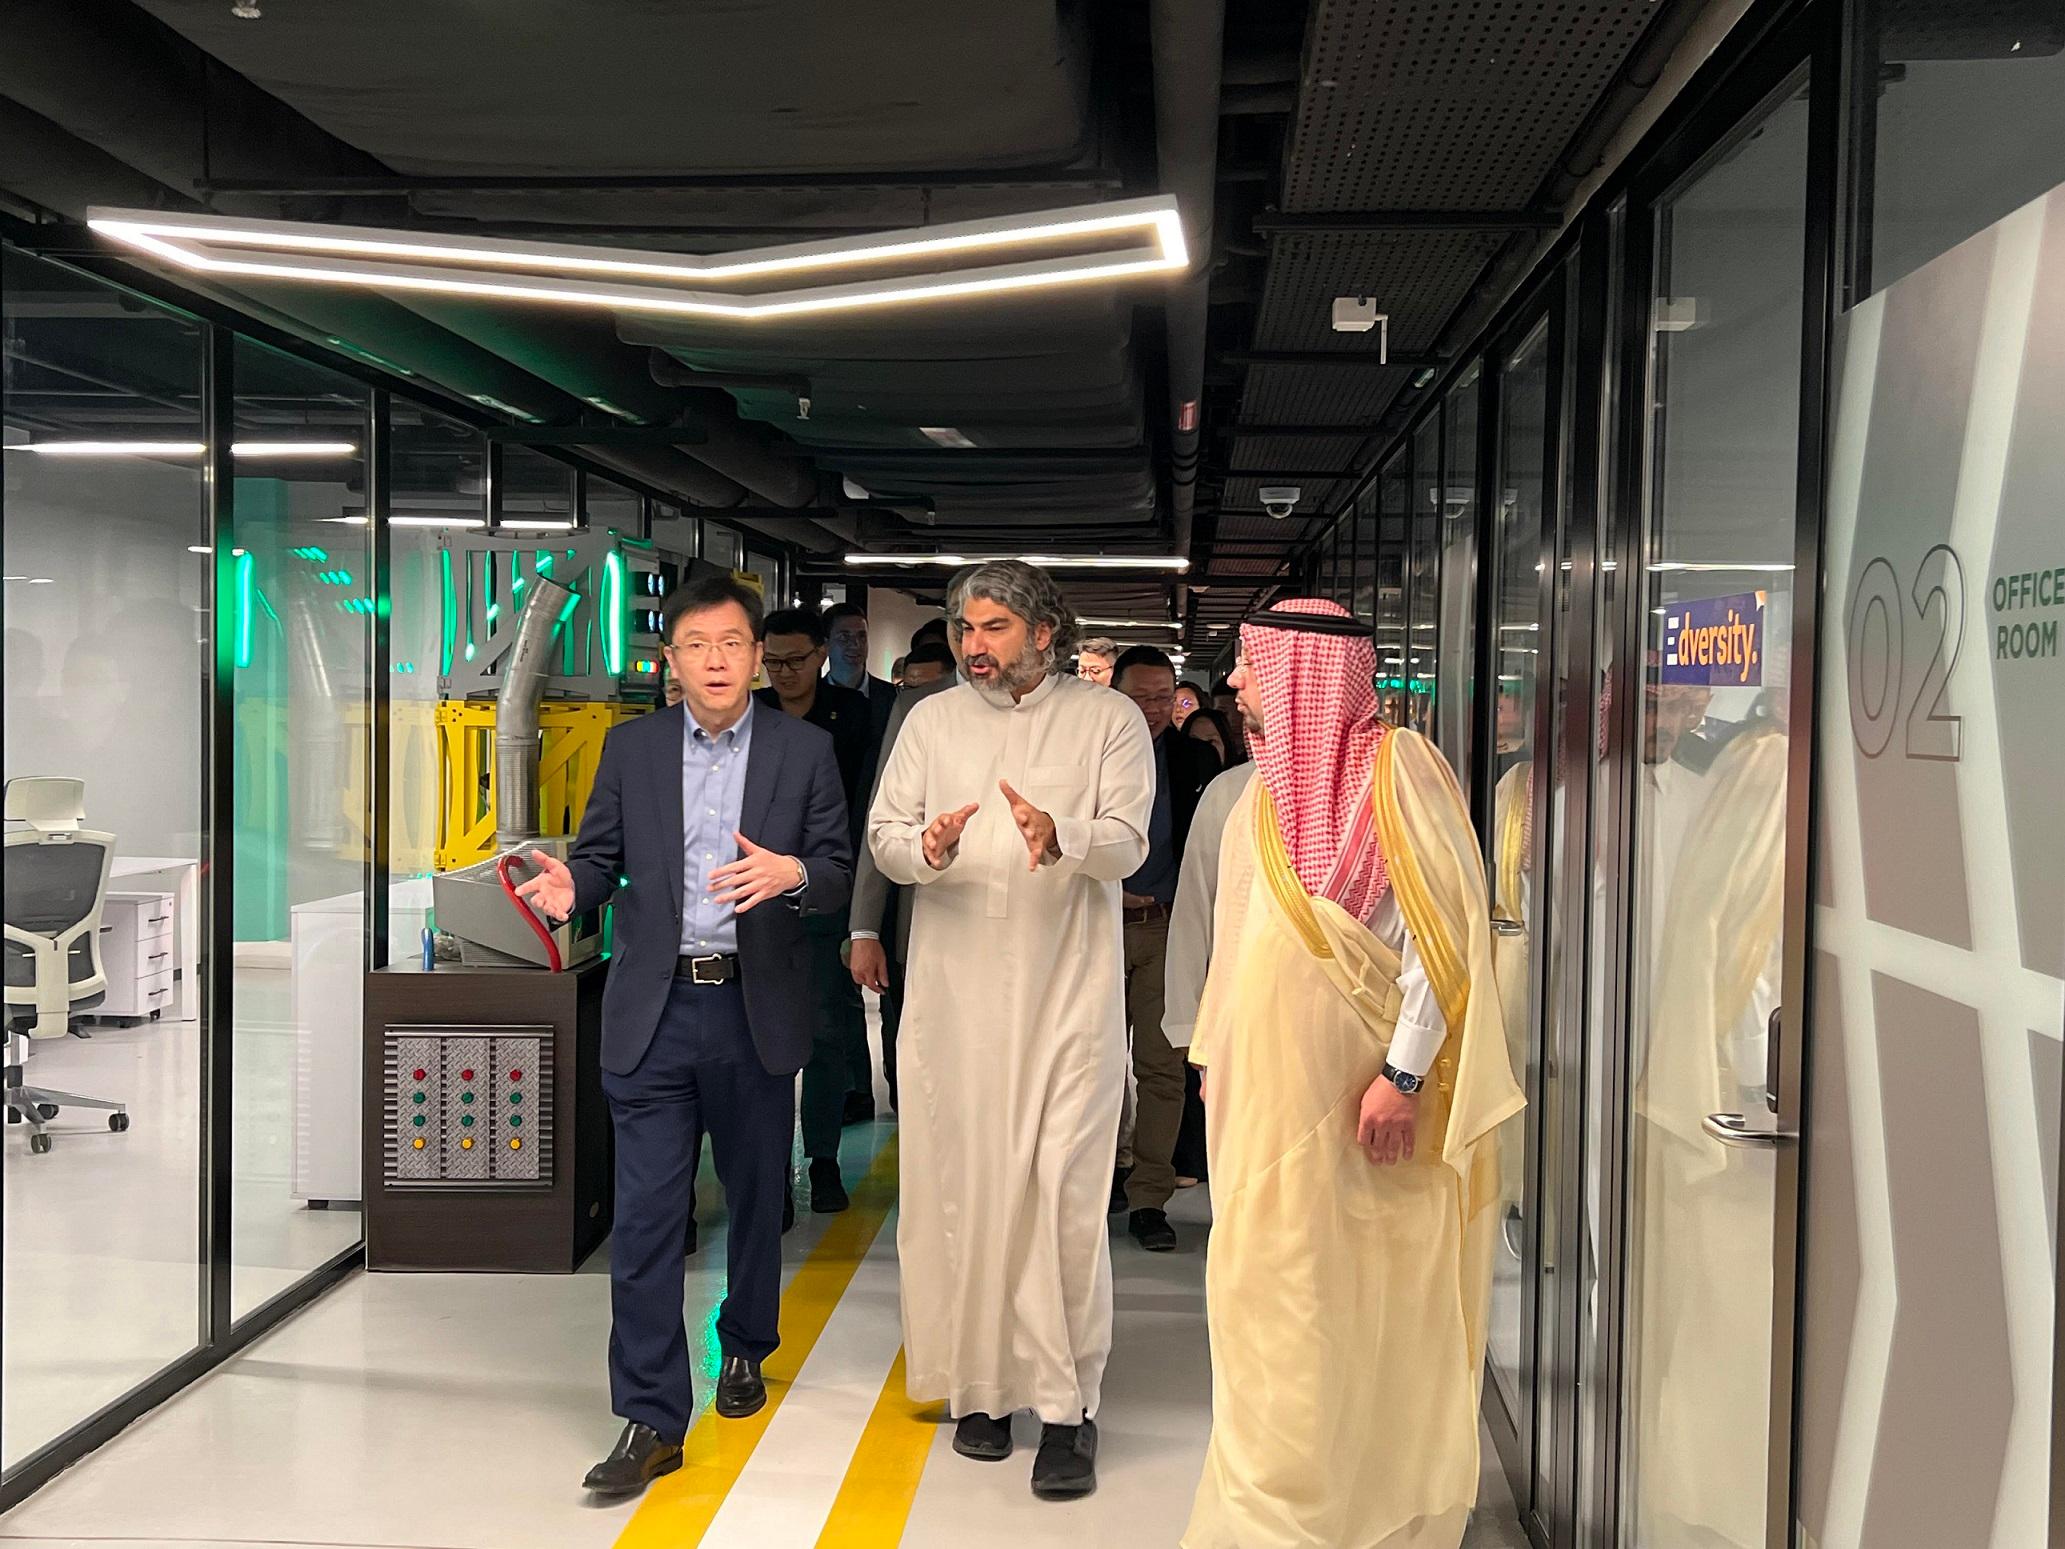 The Secretary for Innovation, Technology and Industry, Professor Sun Dong (first left), toured The Garage, an accelerator in King Abdulaziz City for Science and Technology (KACST) on March 3 (Riyadh time). Looking on is the President of KACST, Dr Munir Eldesouki (first right).